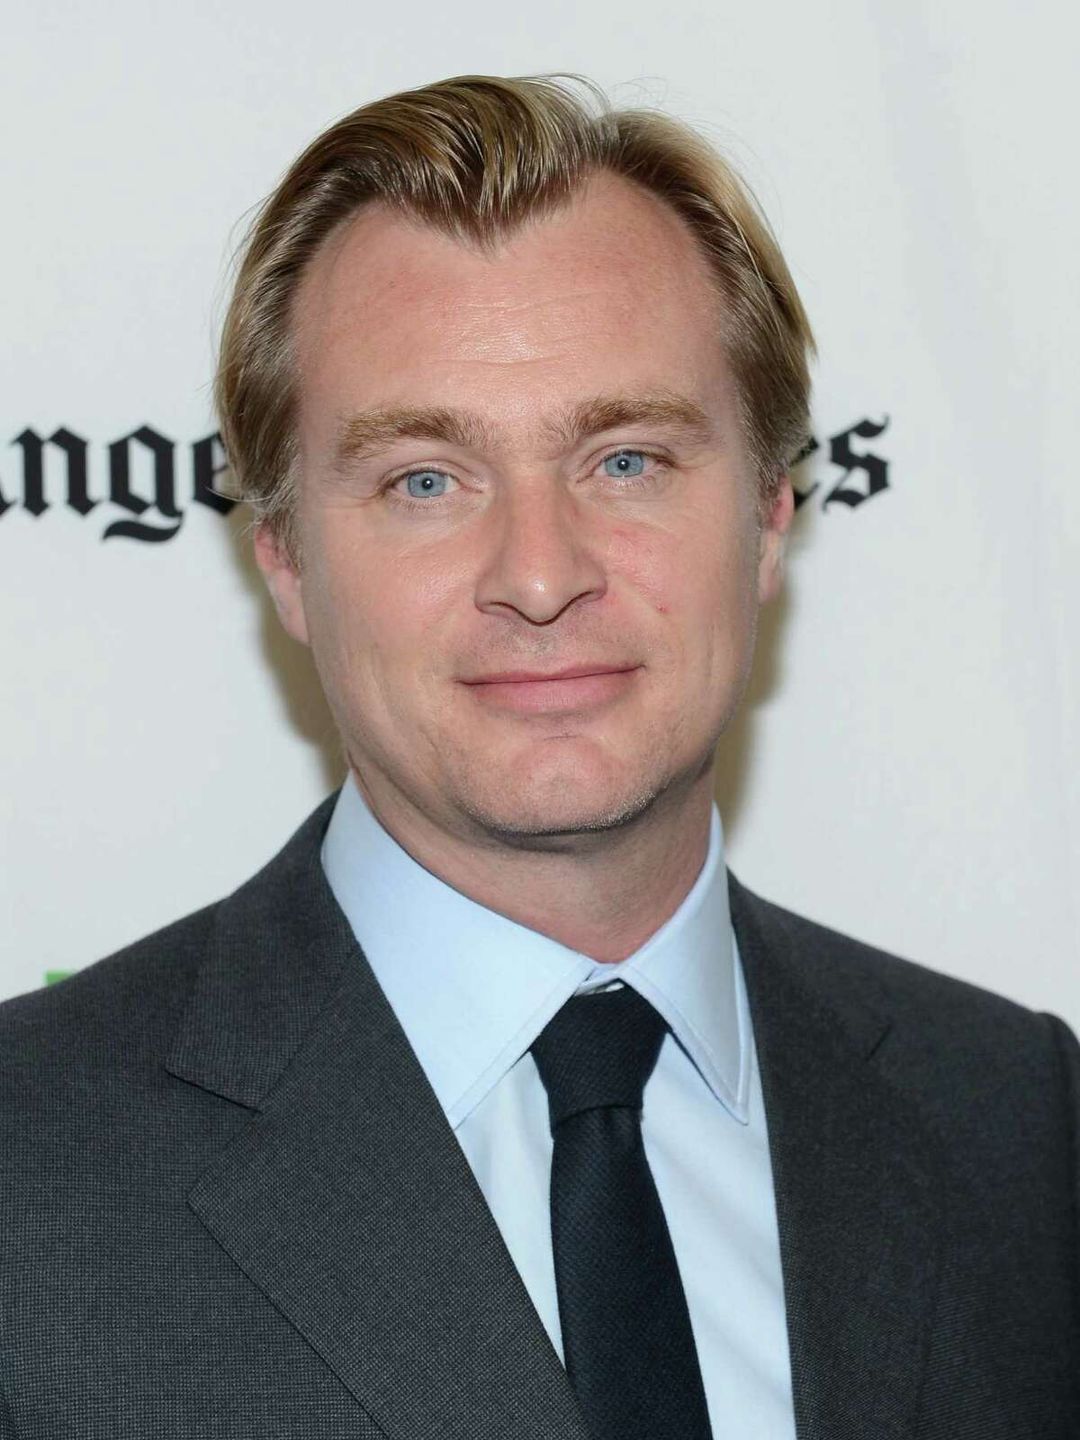 Christopher Nolan young age